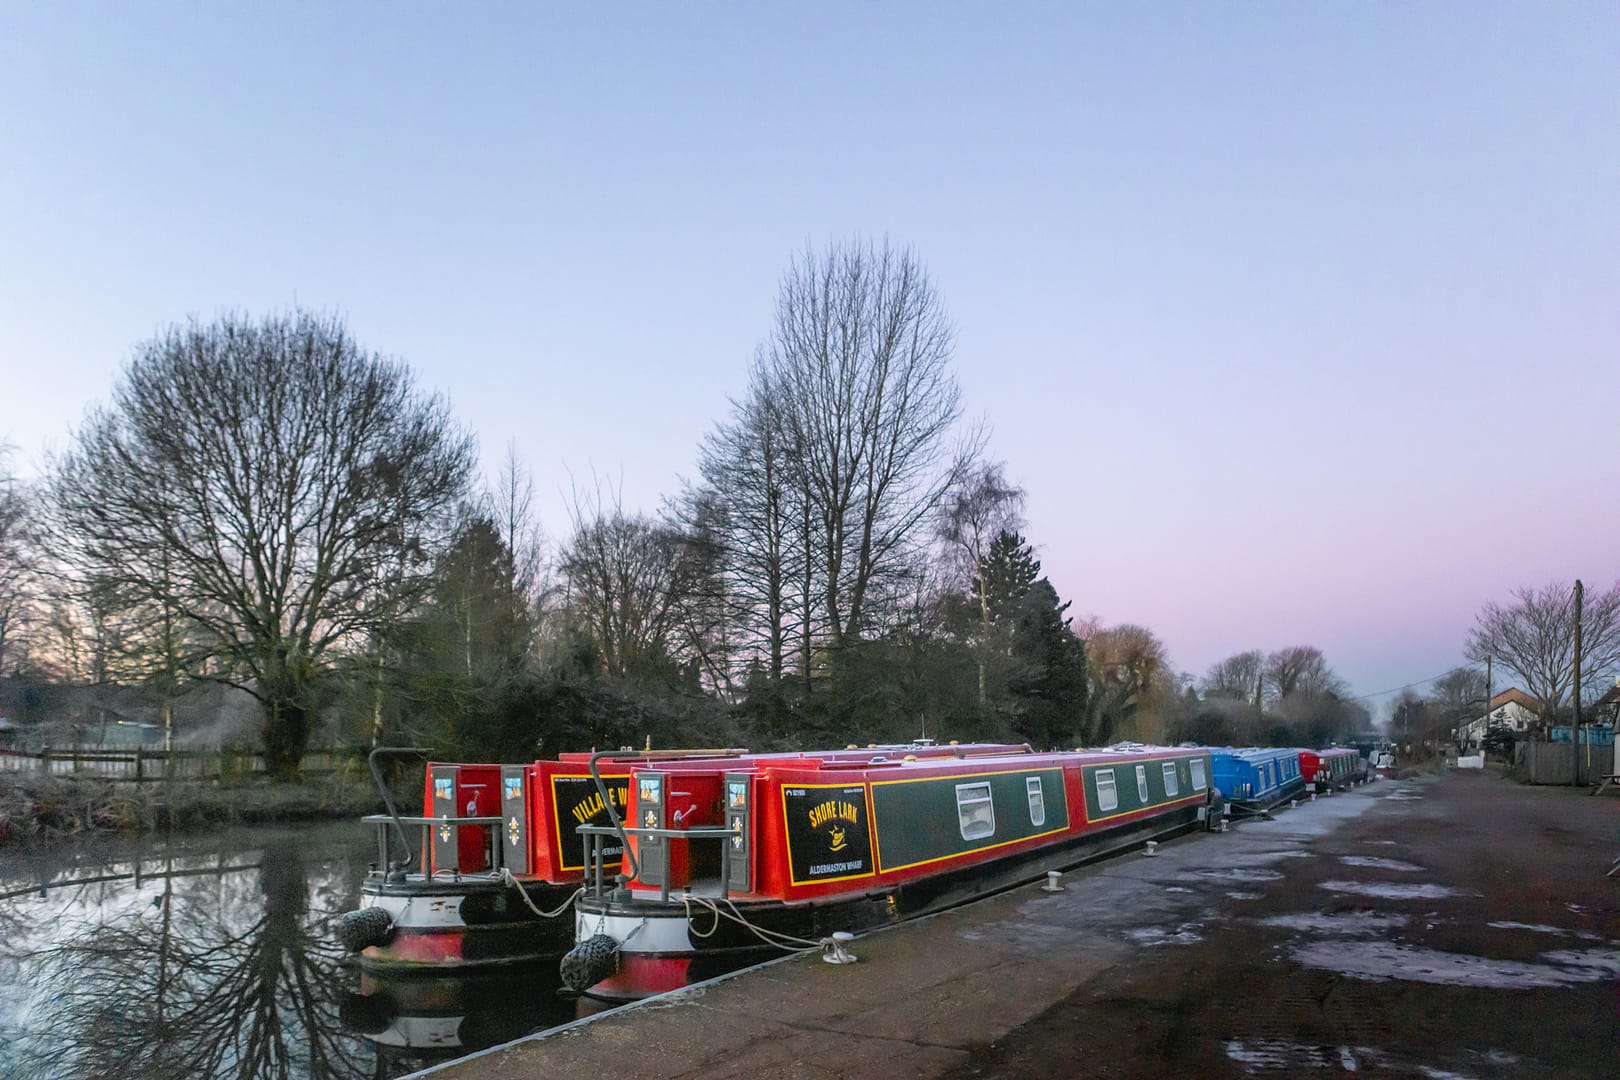 Aldermaston Wharf Canal Winter Dawn on the Kennet and Avon Canal.